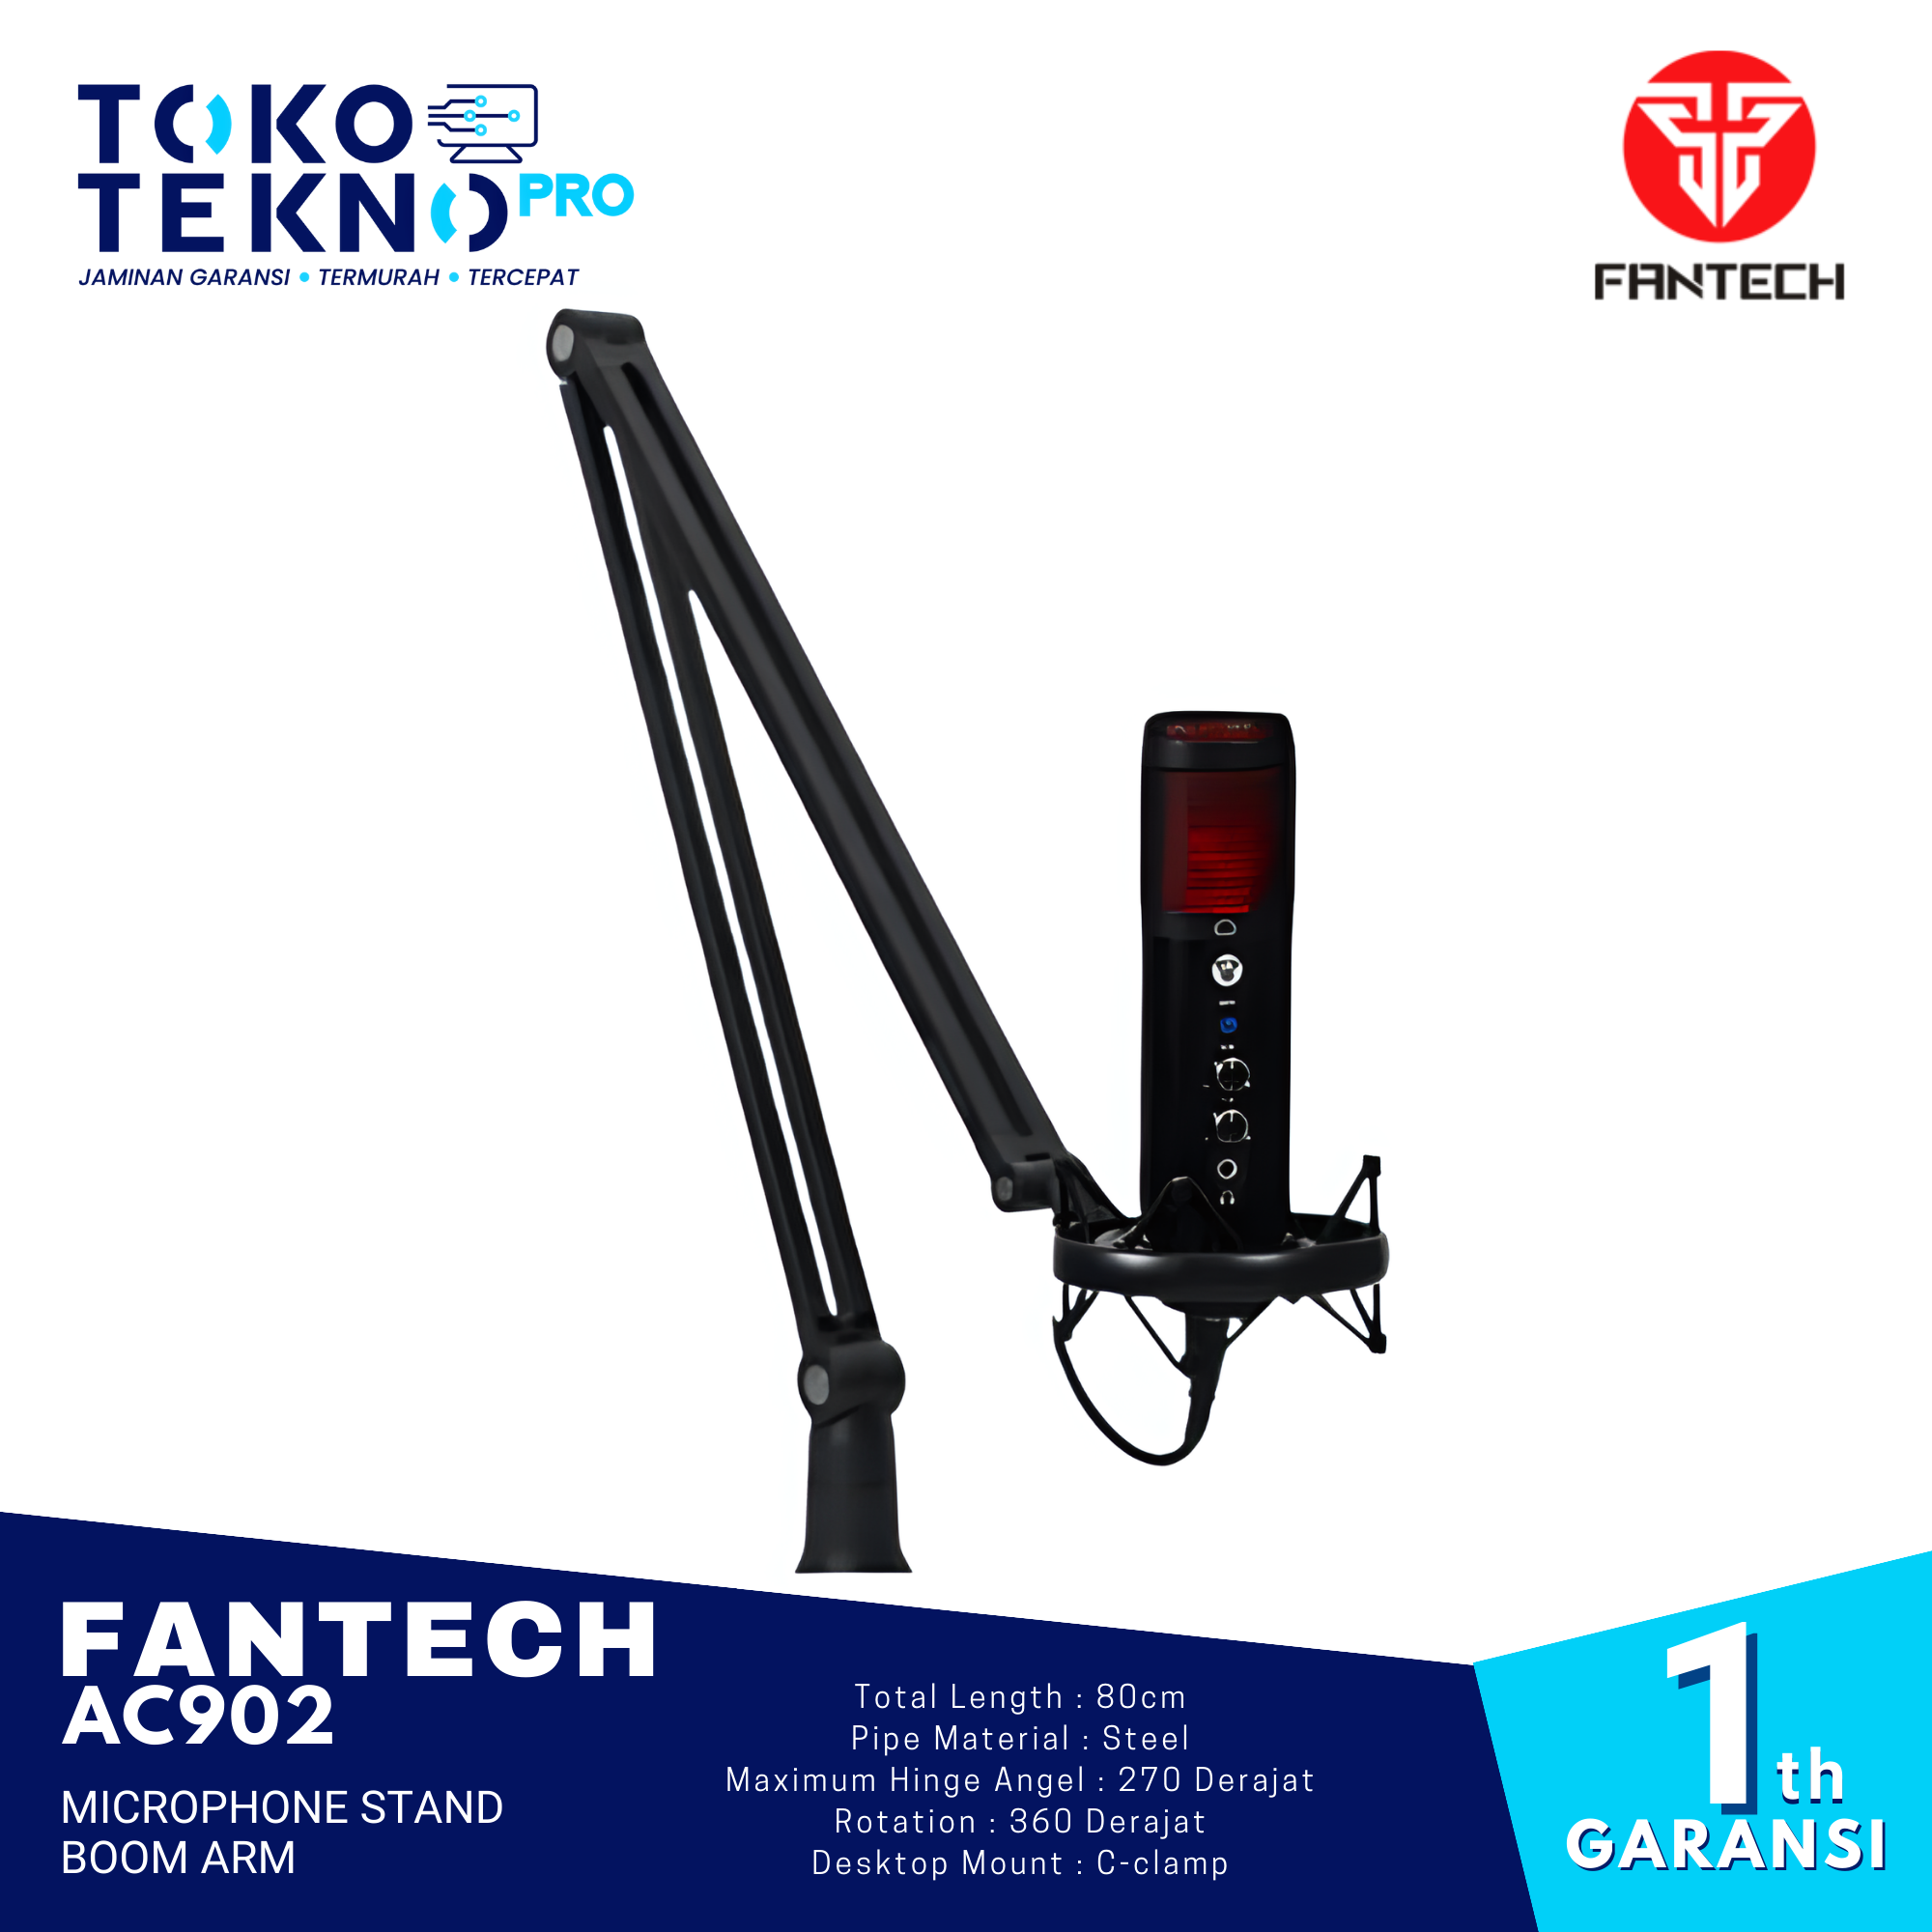 Fantech AC902 Microphone Stand Boom Arm